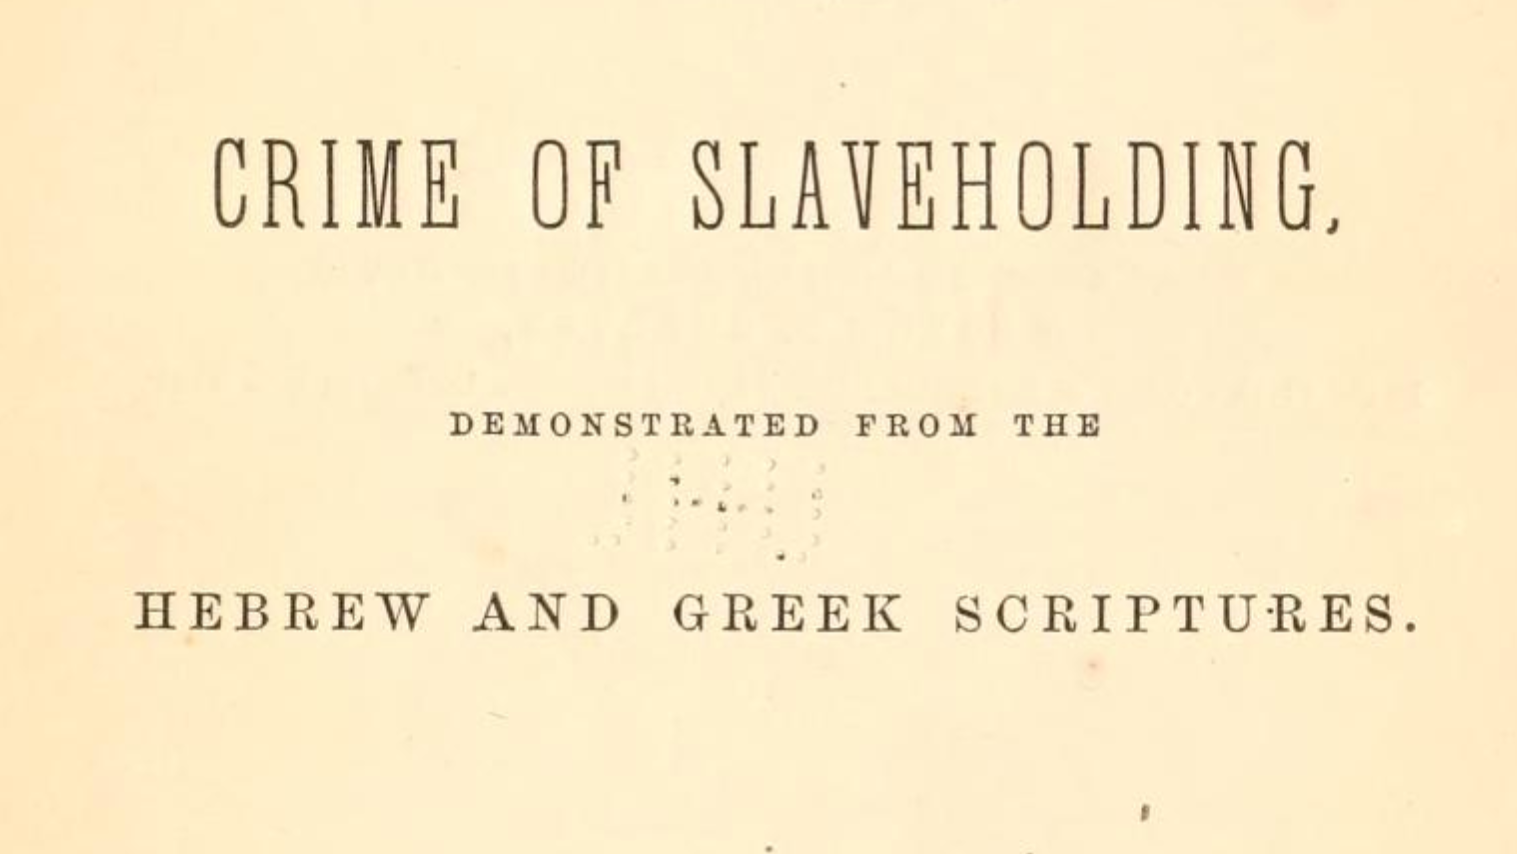 Image: The Guilt of Slavery and the Crime of Slaveholding, The James Birney Collection, the Internet Archive